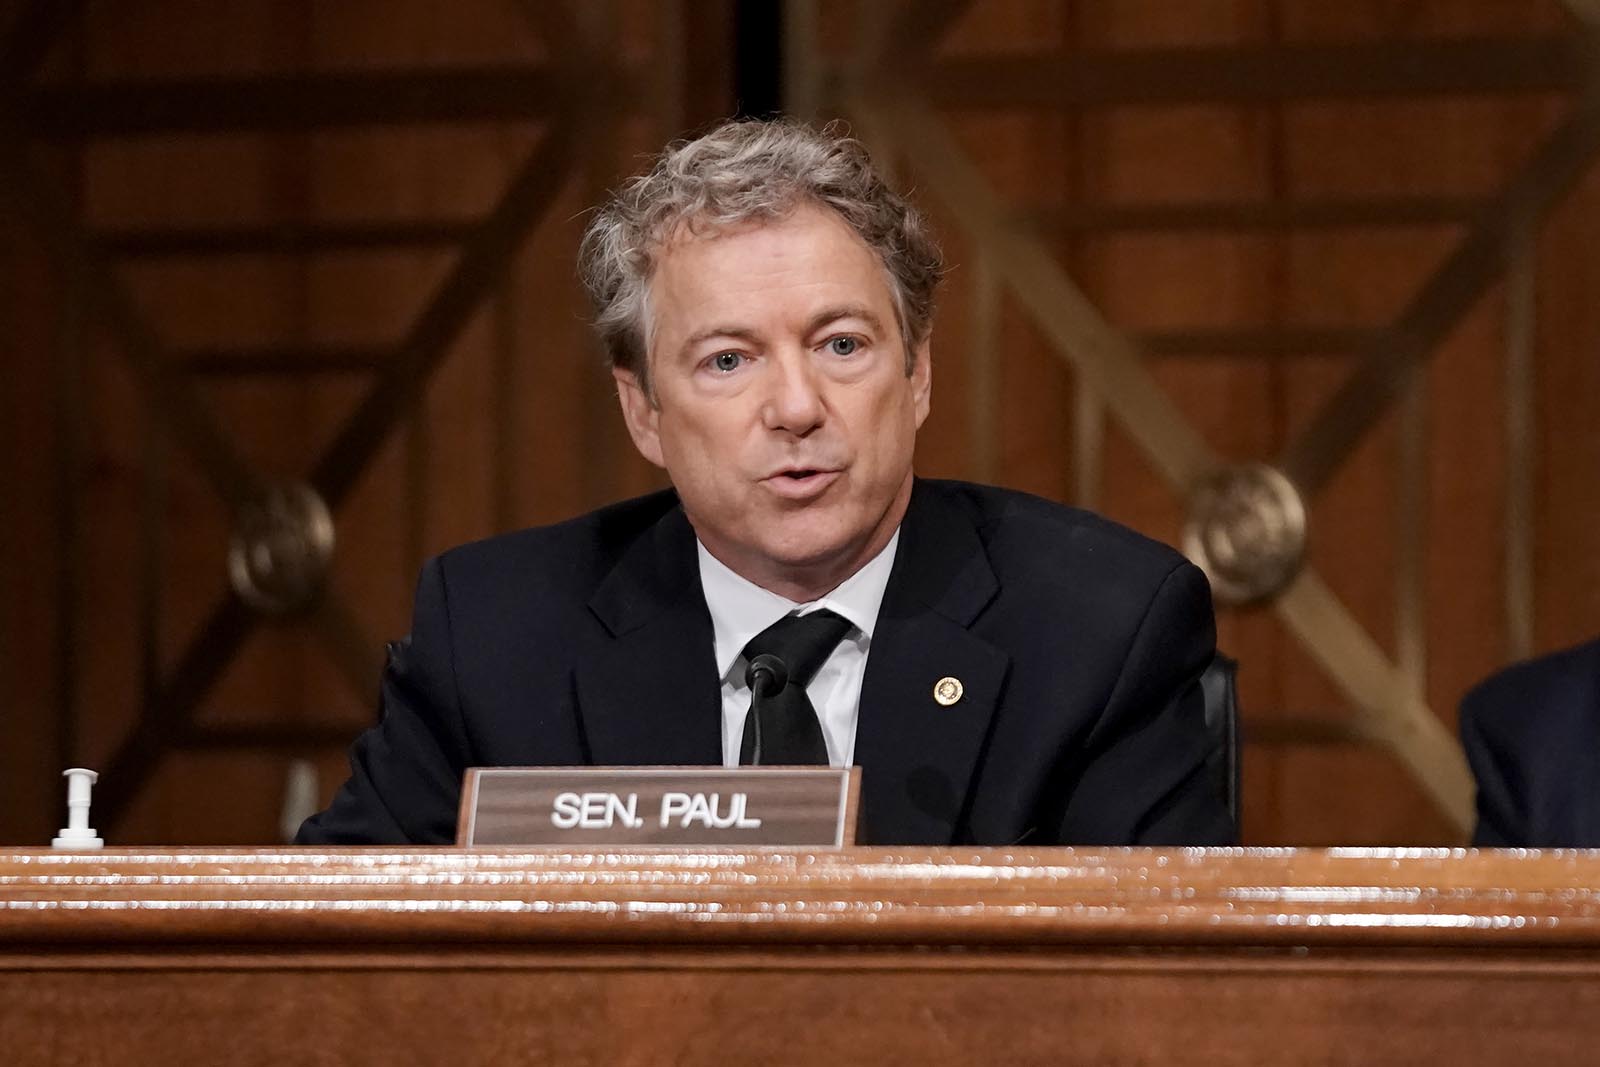 Sen. Rand Paul asks questions during a hearing to discuss election security and the 2020 election process on December 16, 2020 on Capitol Hill in Washington.